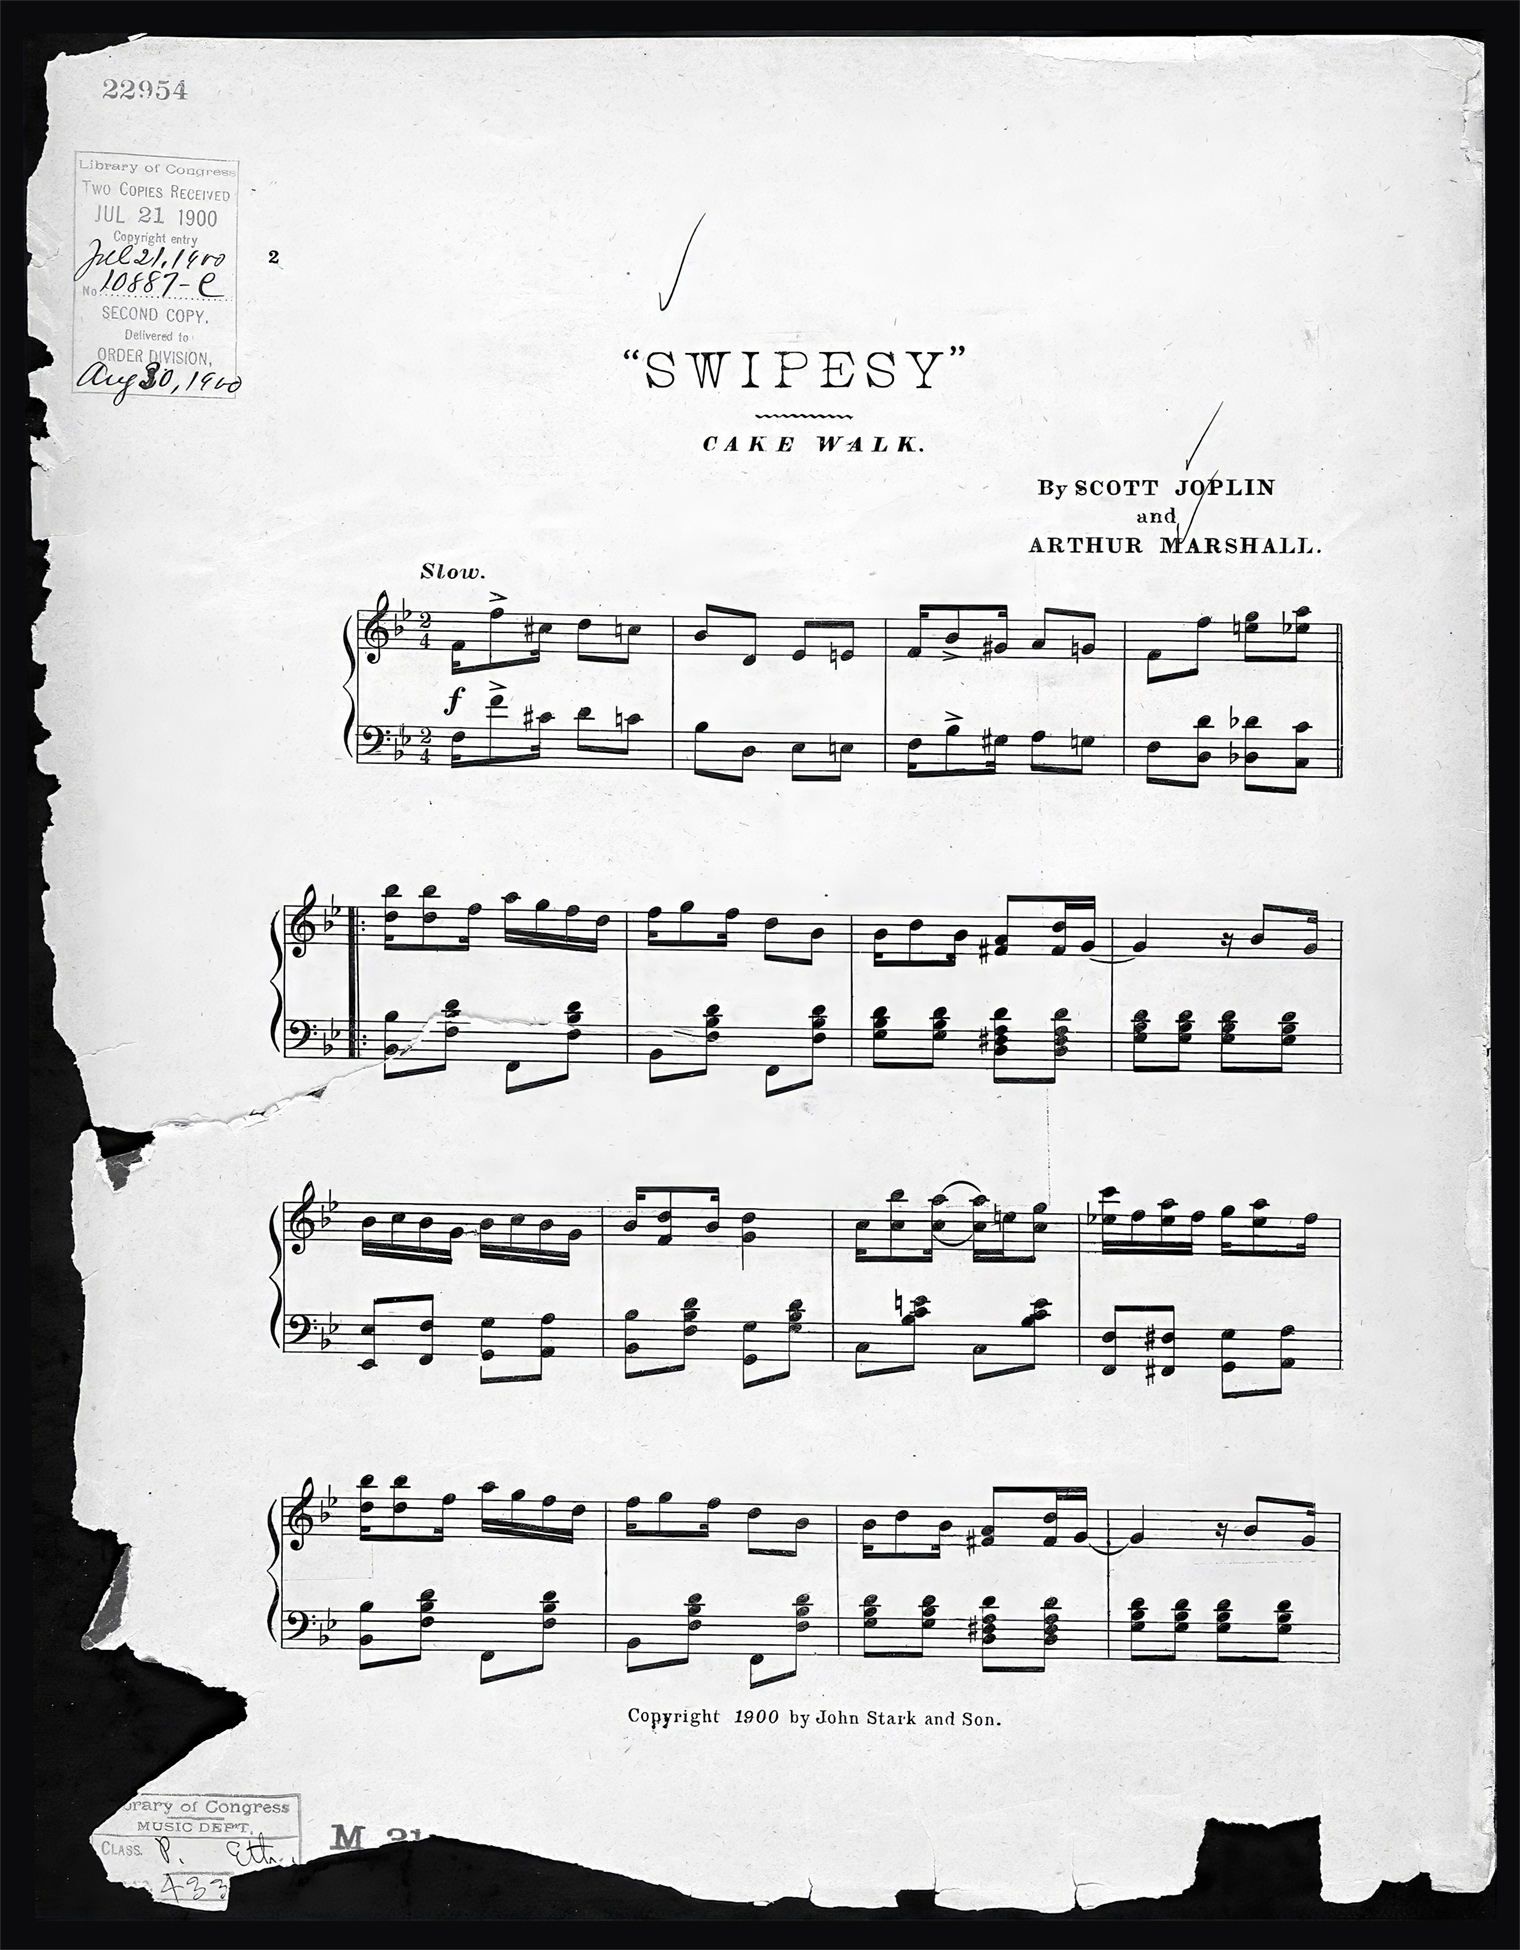 Joplin's Swipesy (page 1) | Before audio recording, sheet music was the main method of distributing hit songs. | Library of Congress